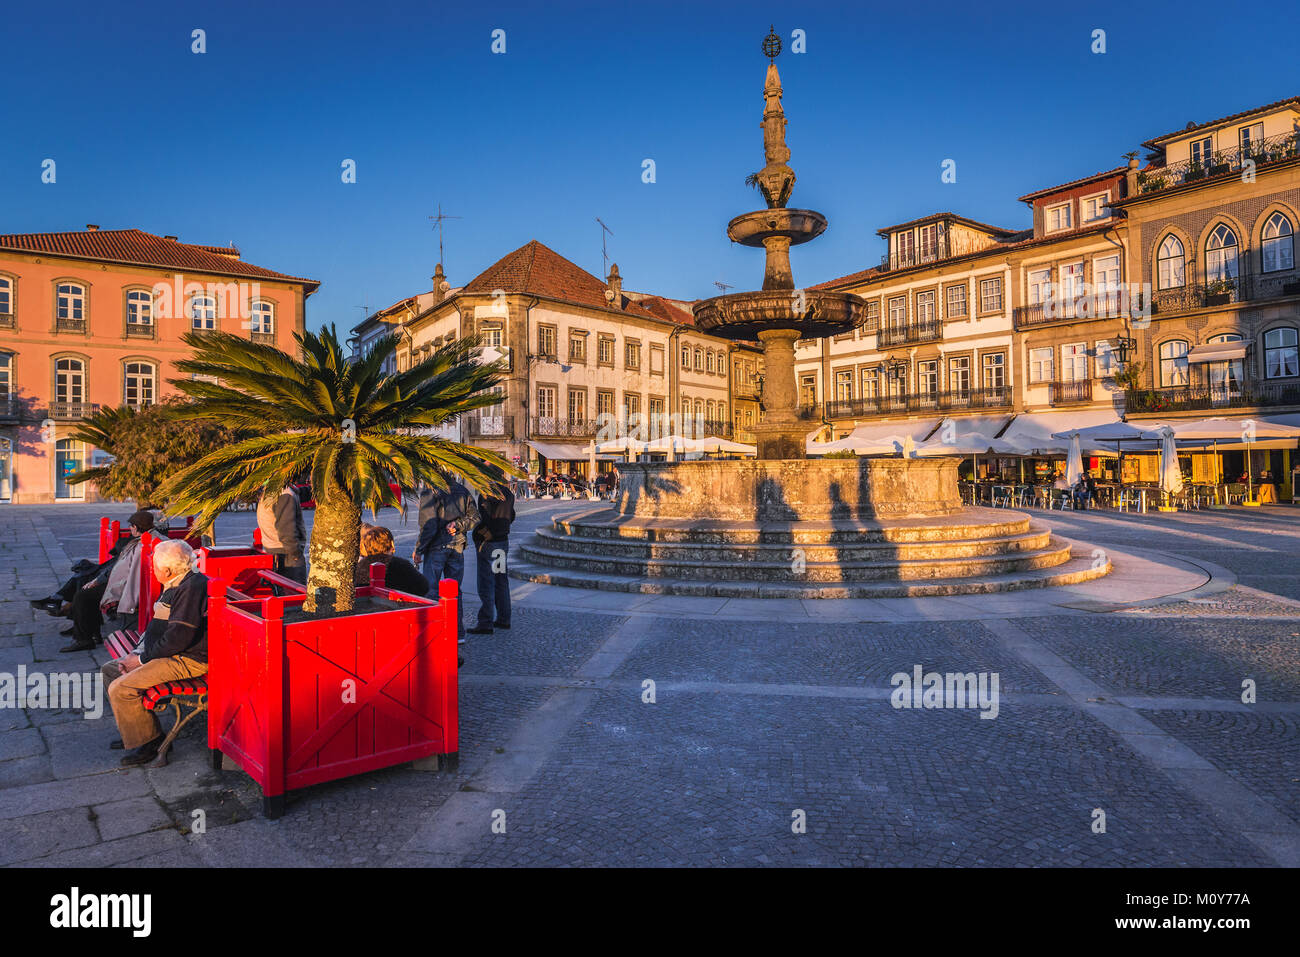 Noble Fountain dates from 1603 at Camoes Square in Ponte de Lima city, part of the district of Viana do Castelo, Norte region of Portugal Stock Photo